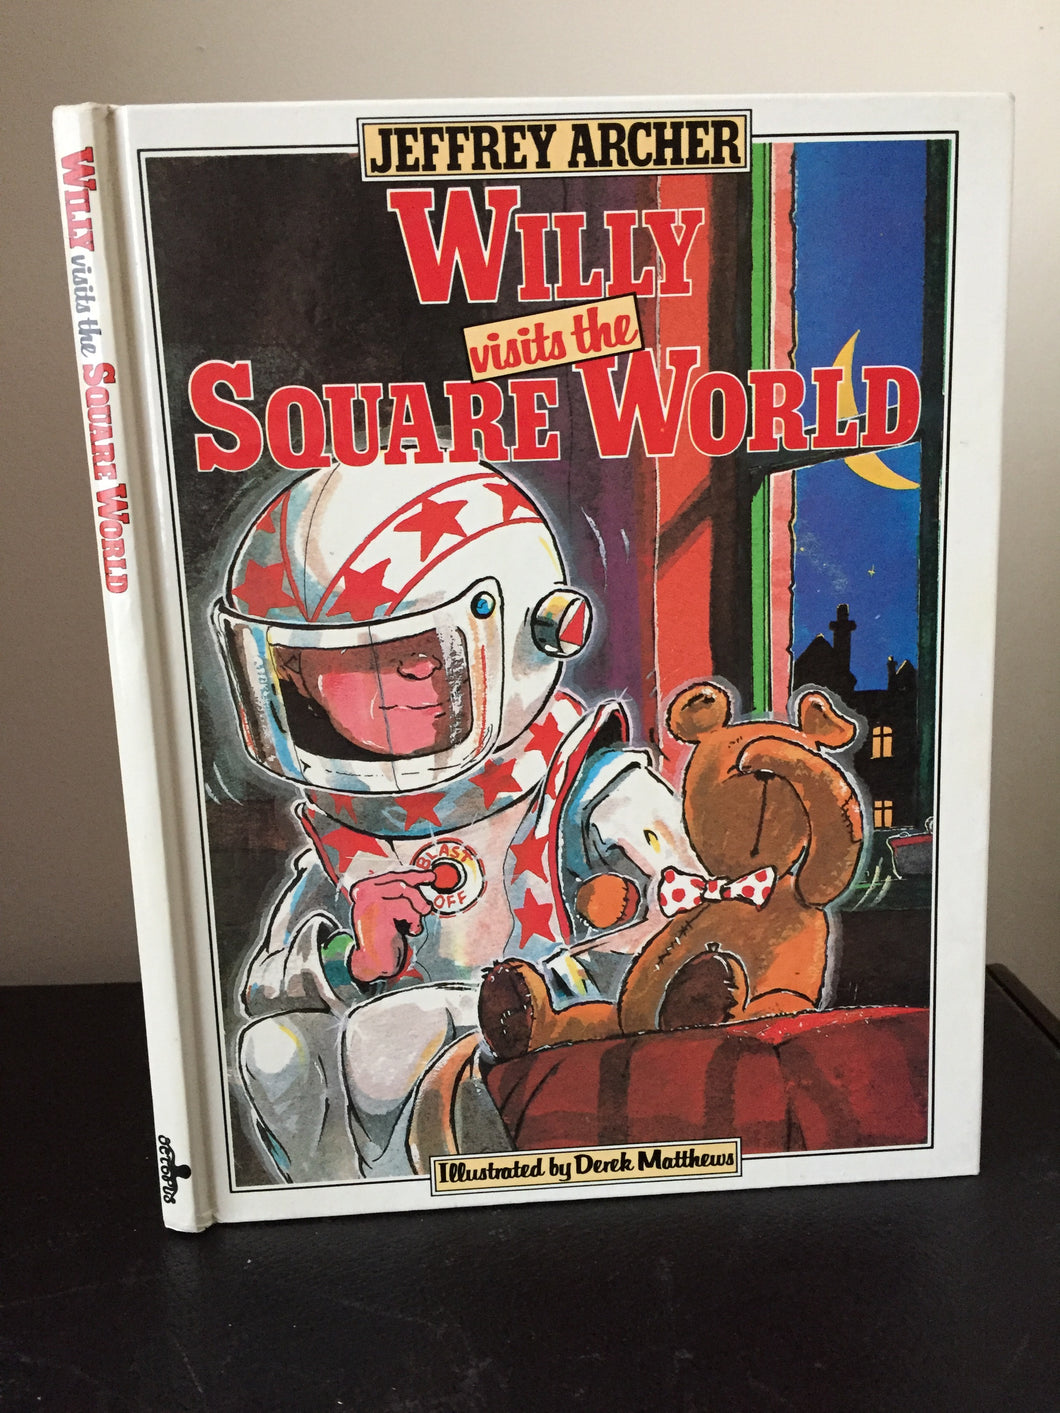 Willy visits the Square World